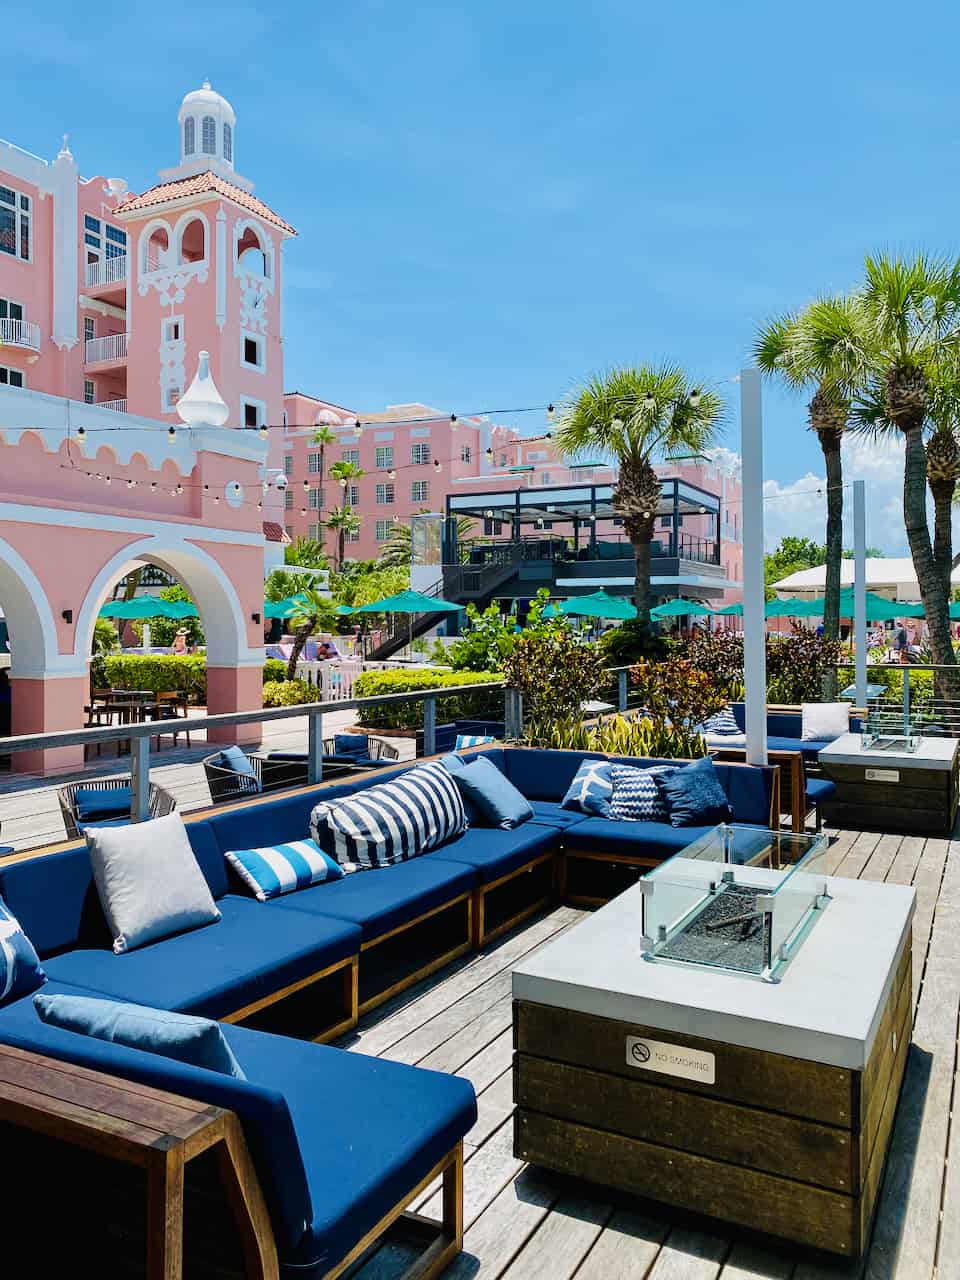 Fire pit and lounge chairs by the pool bar at Don CeSar 